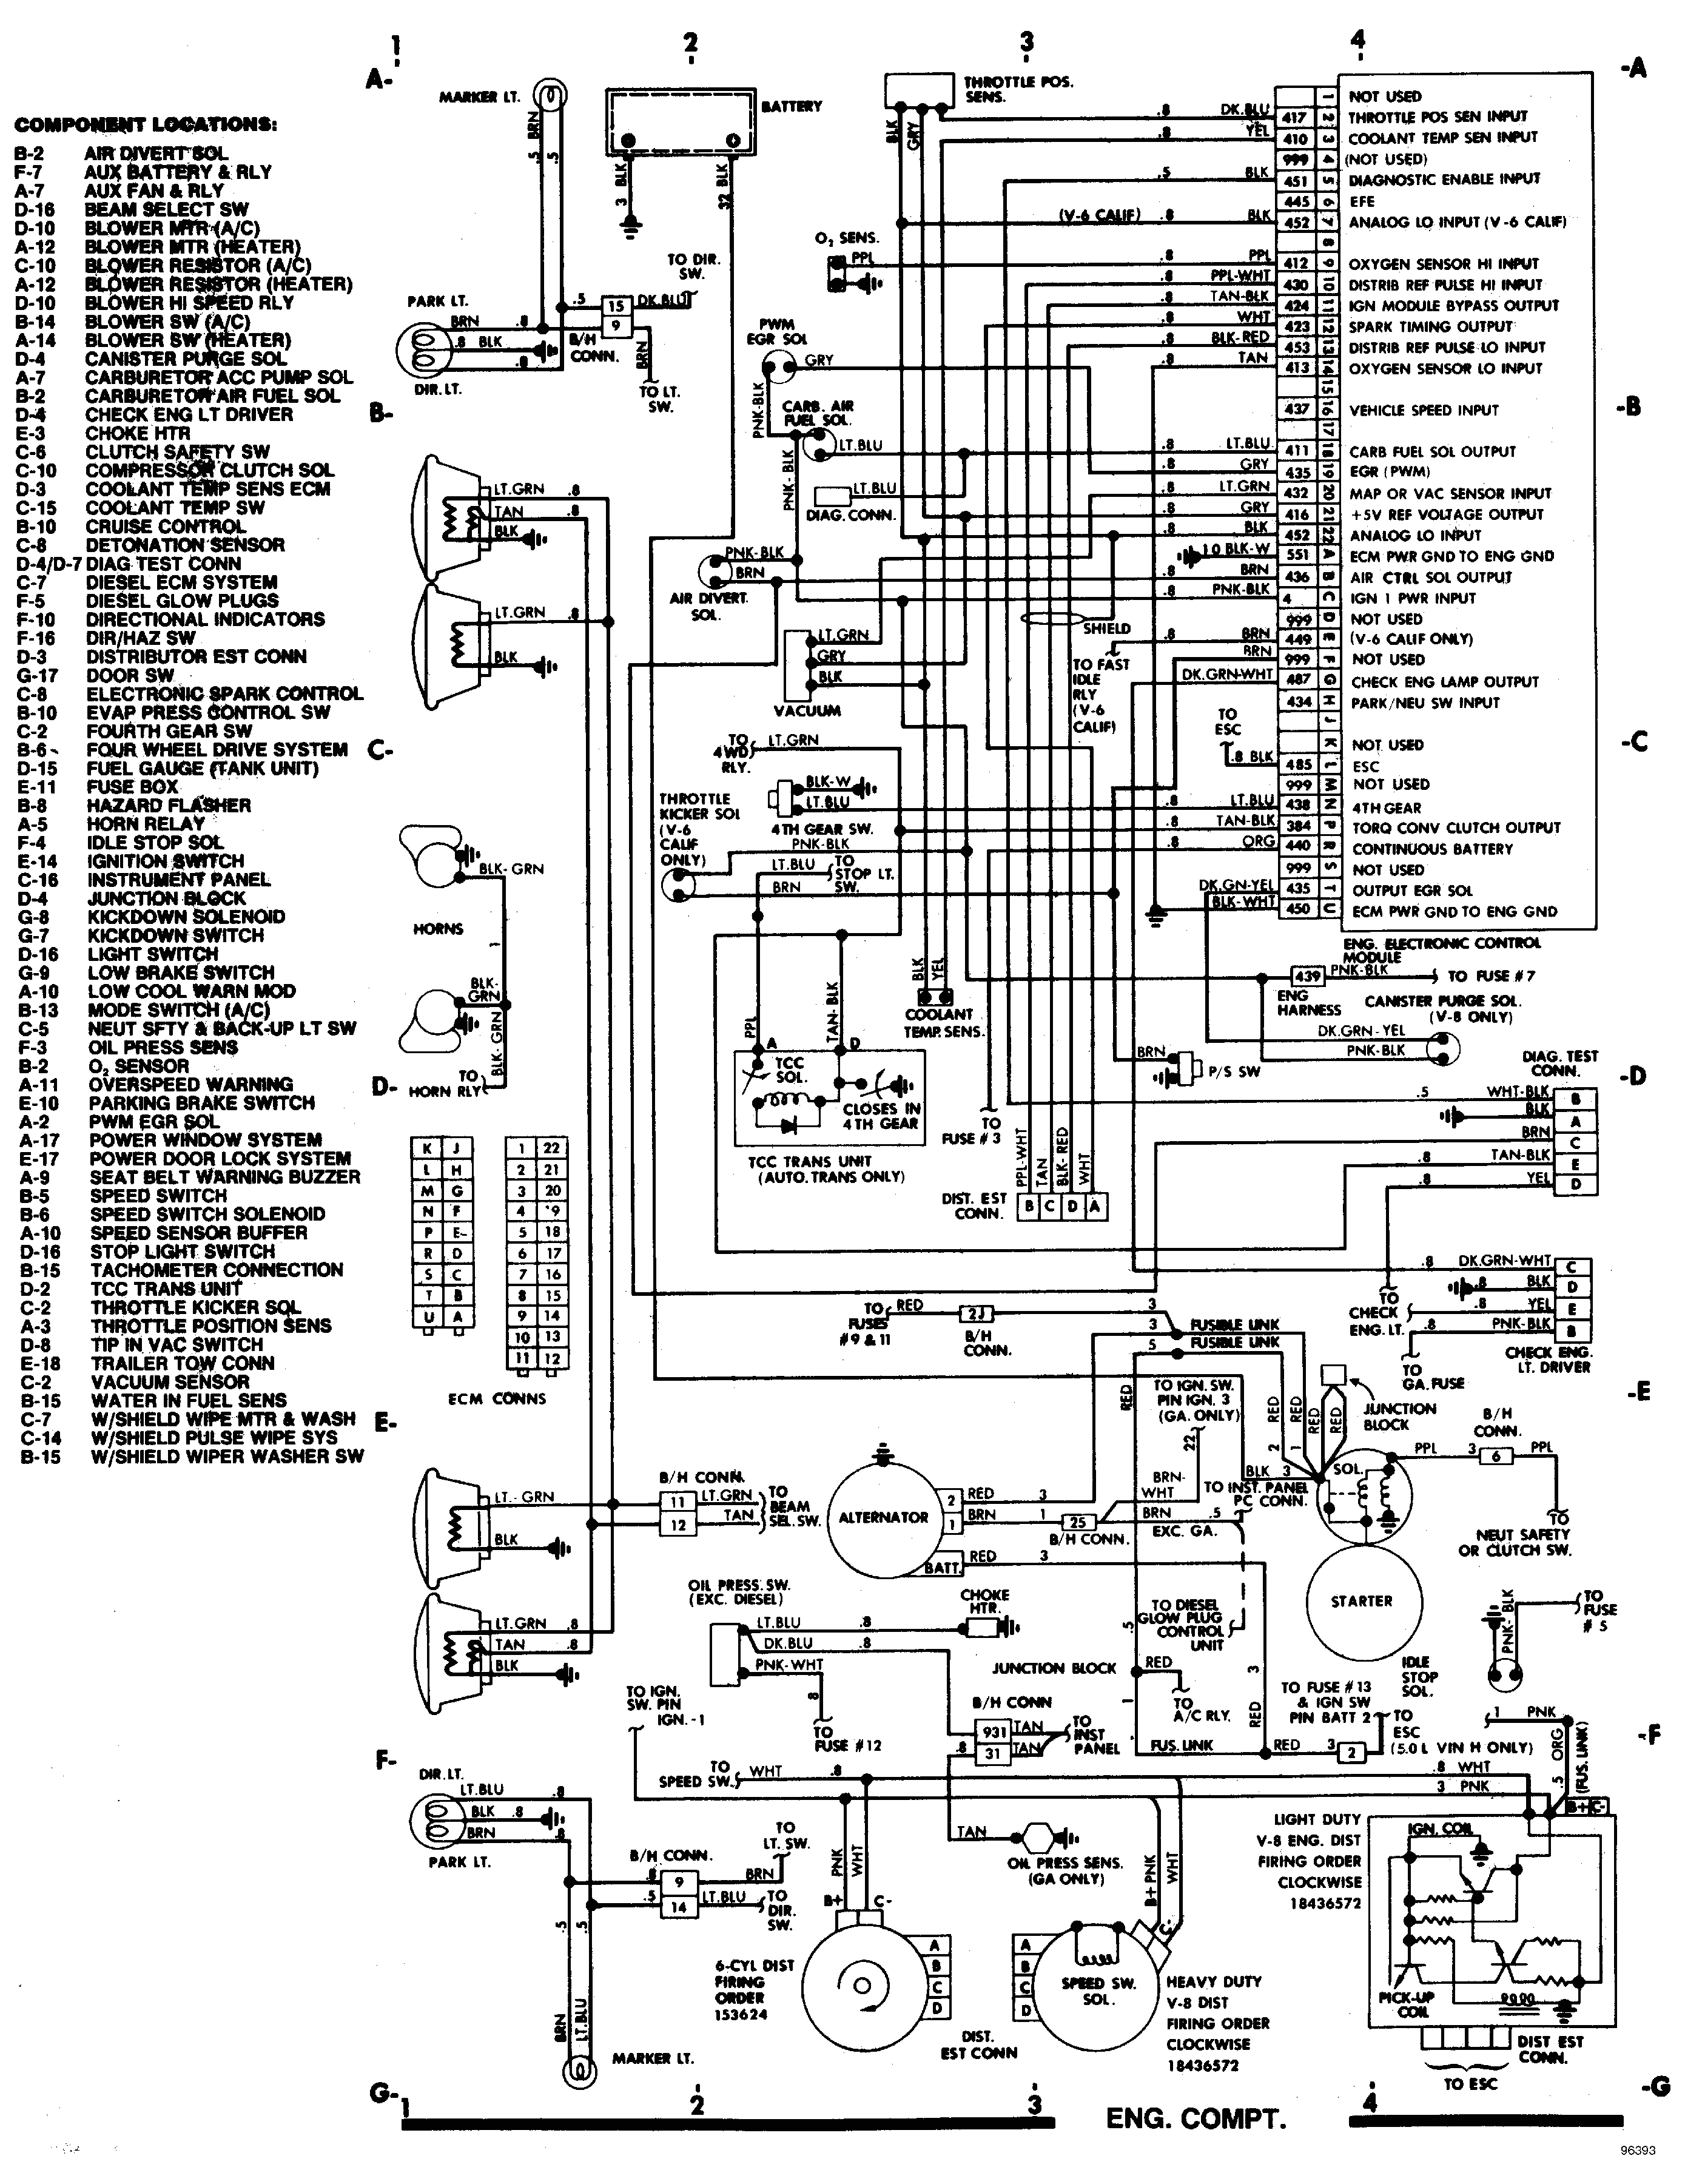 85 chevy truck wiring diagram chevrolet c20 4x2 had battery and alternator checked at both